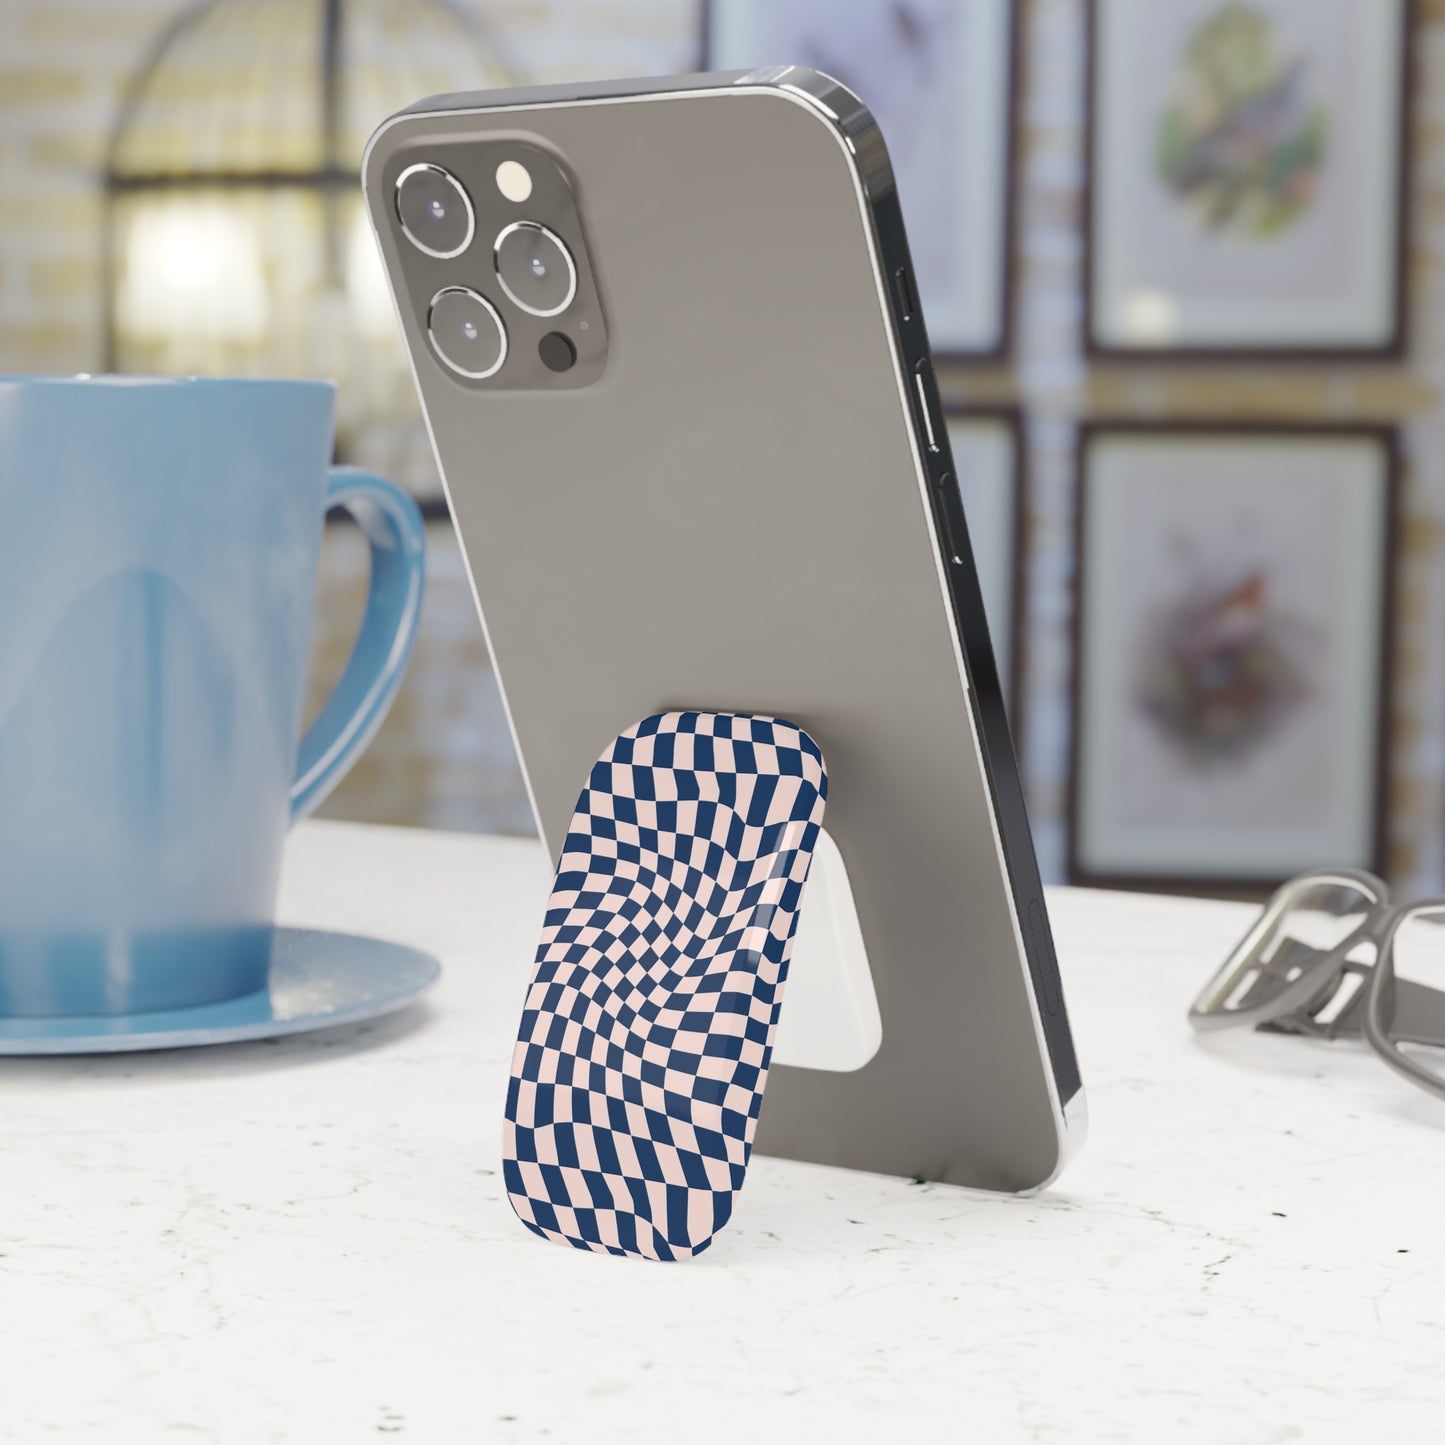 Blue Wavy Checkerboard Phone Click-On Grip